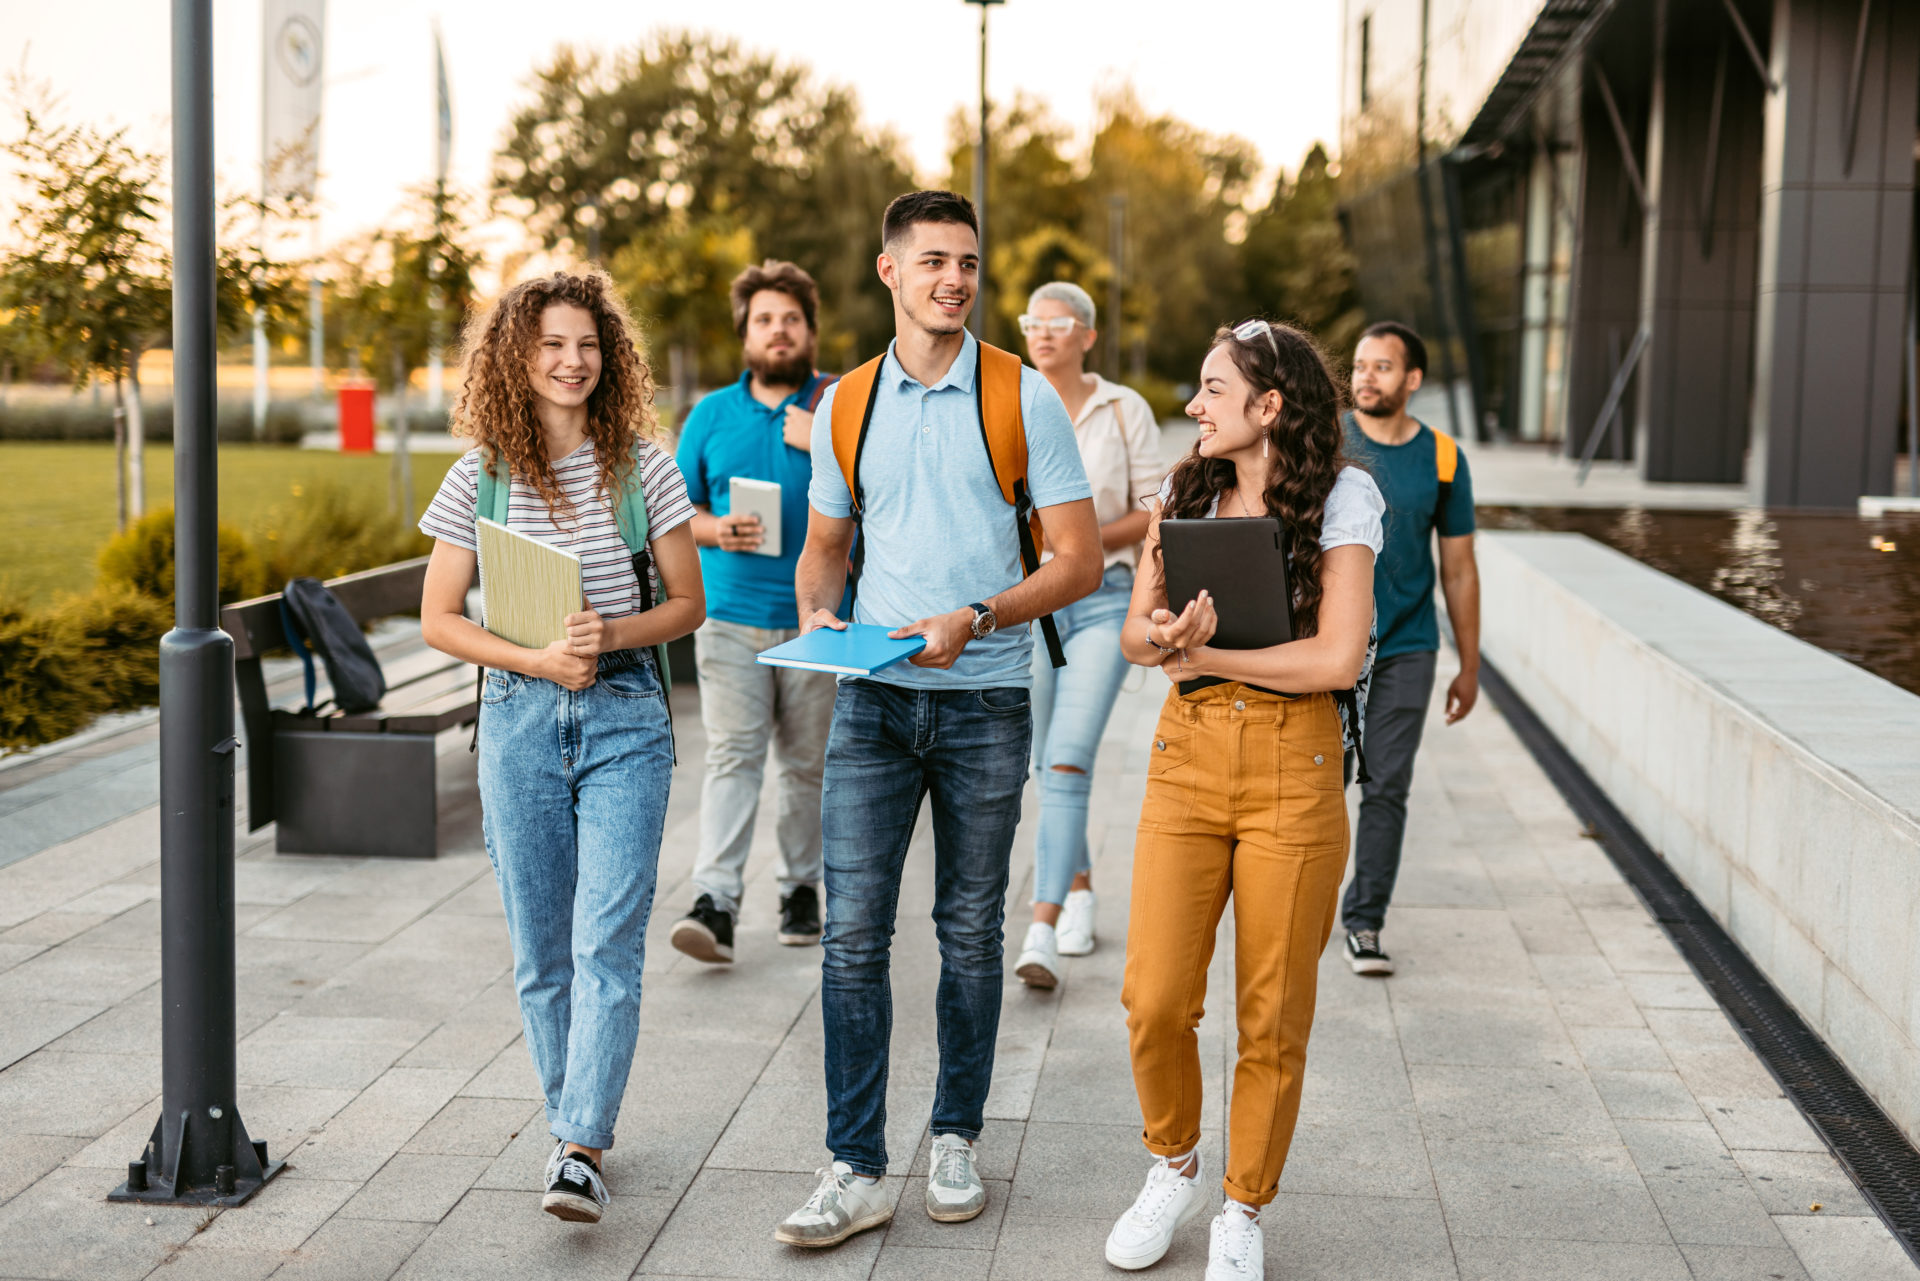 Students Walking On The University Campus